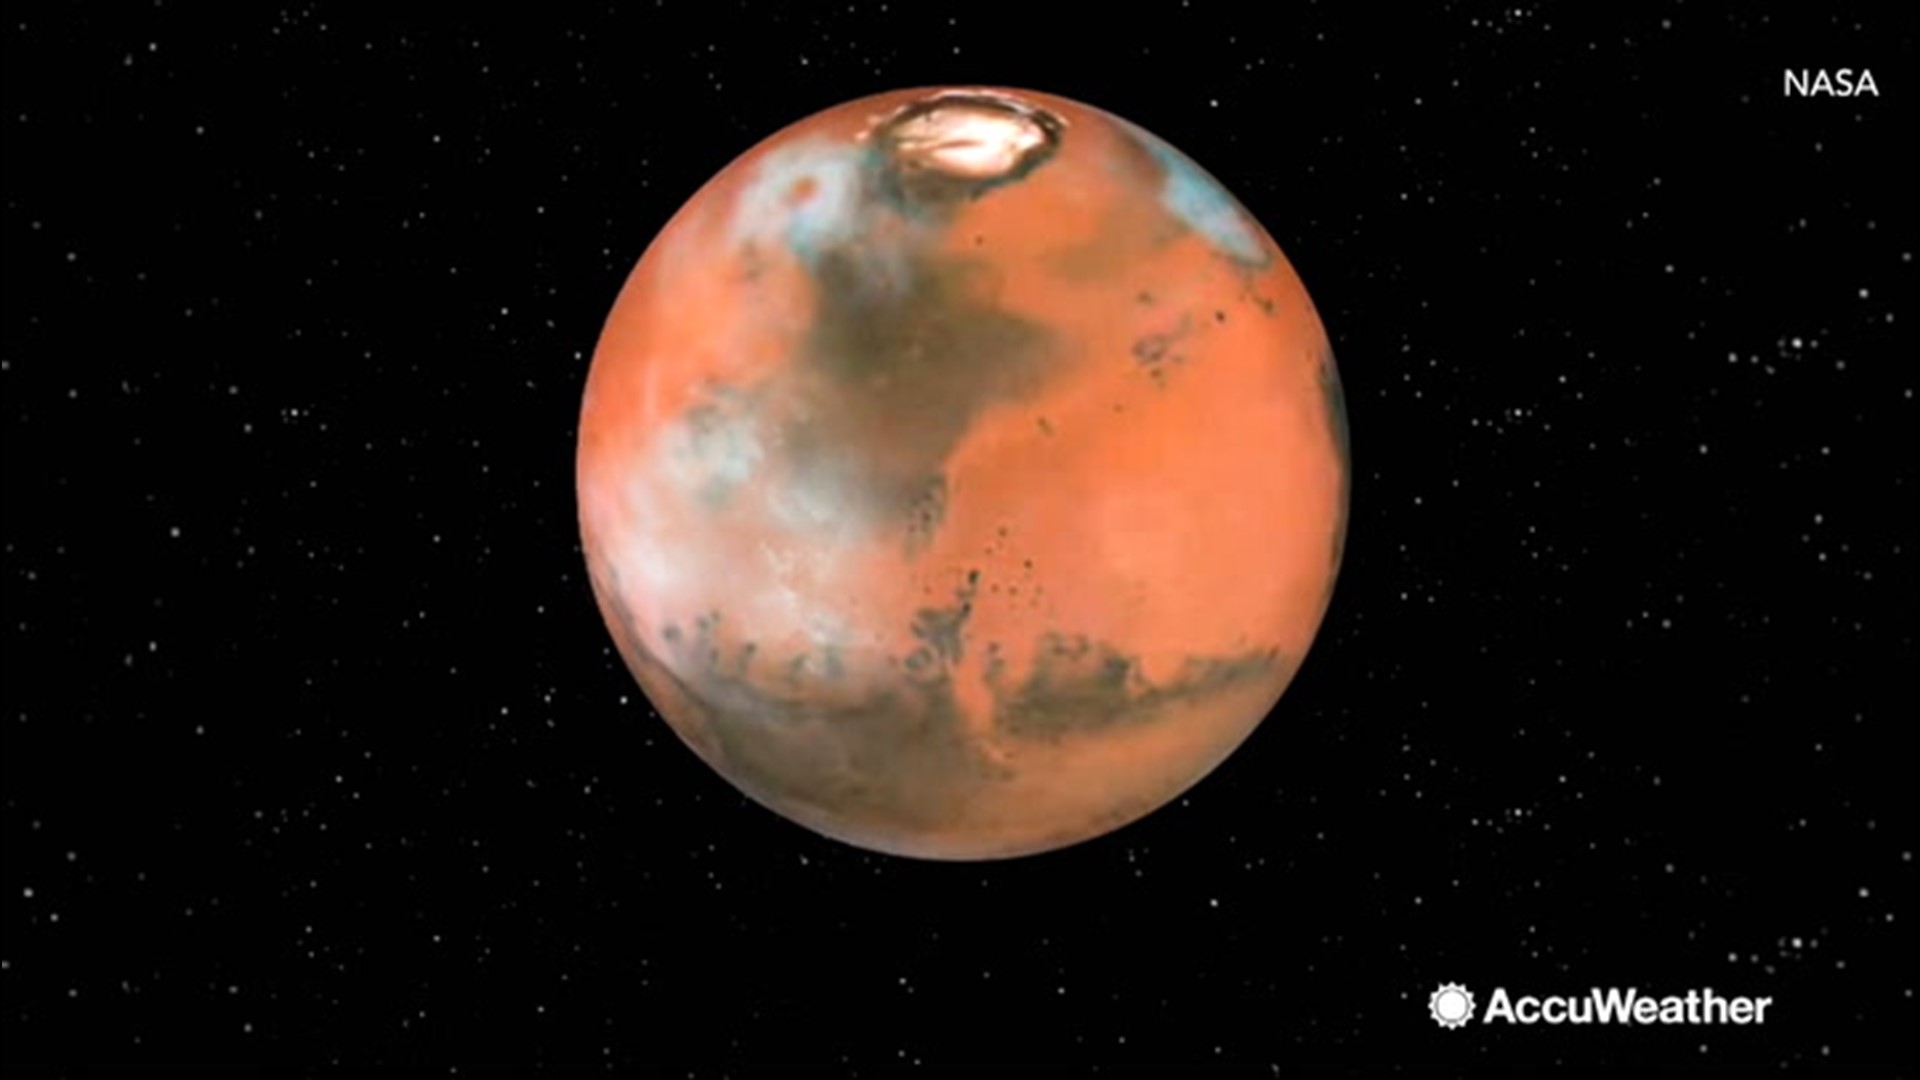 New research from the University of Colorado Boulder suggests that the Martian clouds may be linked to smoke left behind by meteors destroyed in Mars' atmosphere.  Let's find out more about this latest study